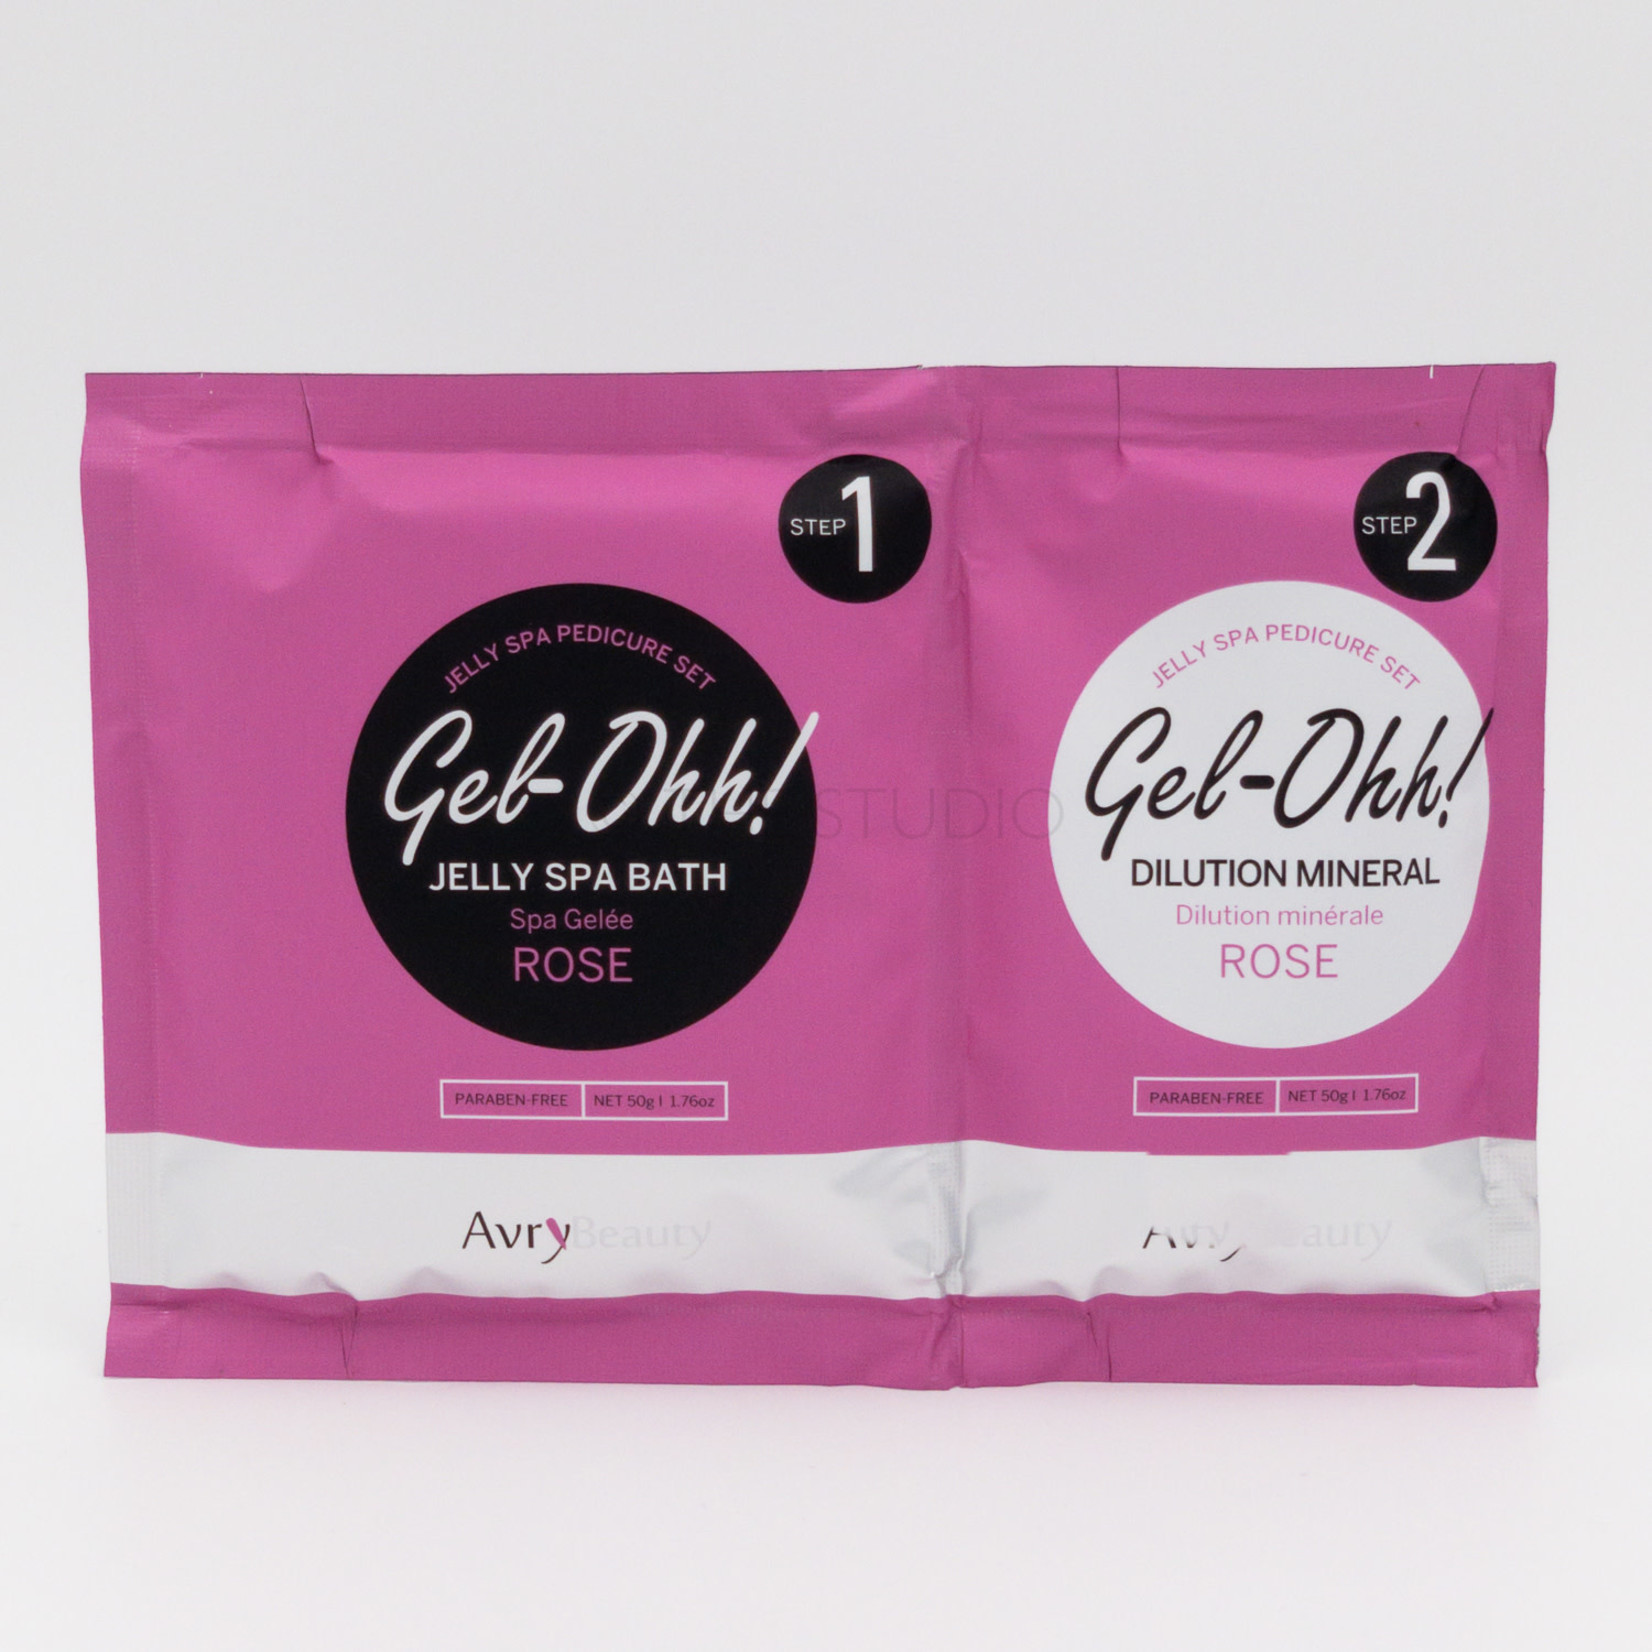 Gel-Ohh! - Jelly Spa Bath - Rose Water - 1 ct